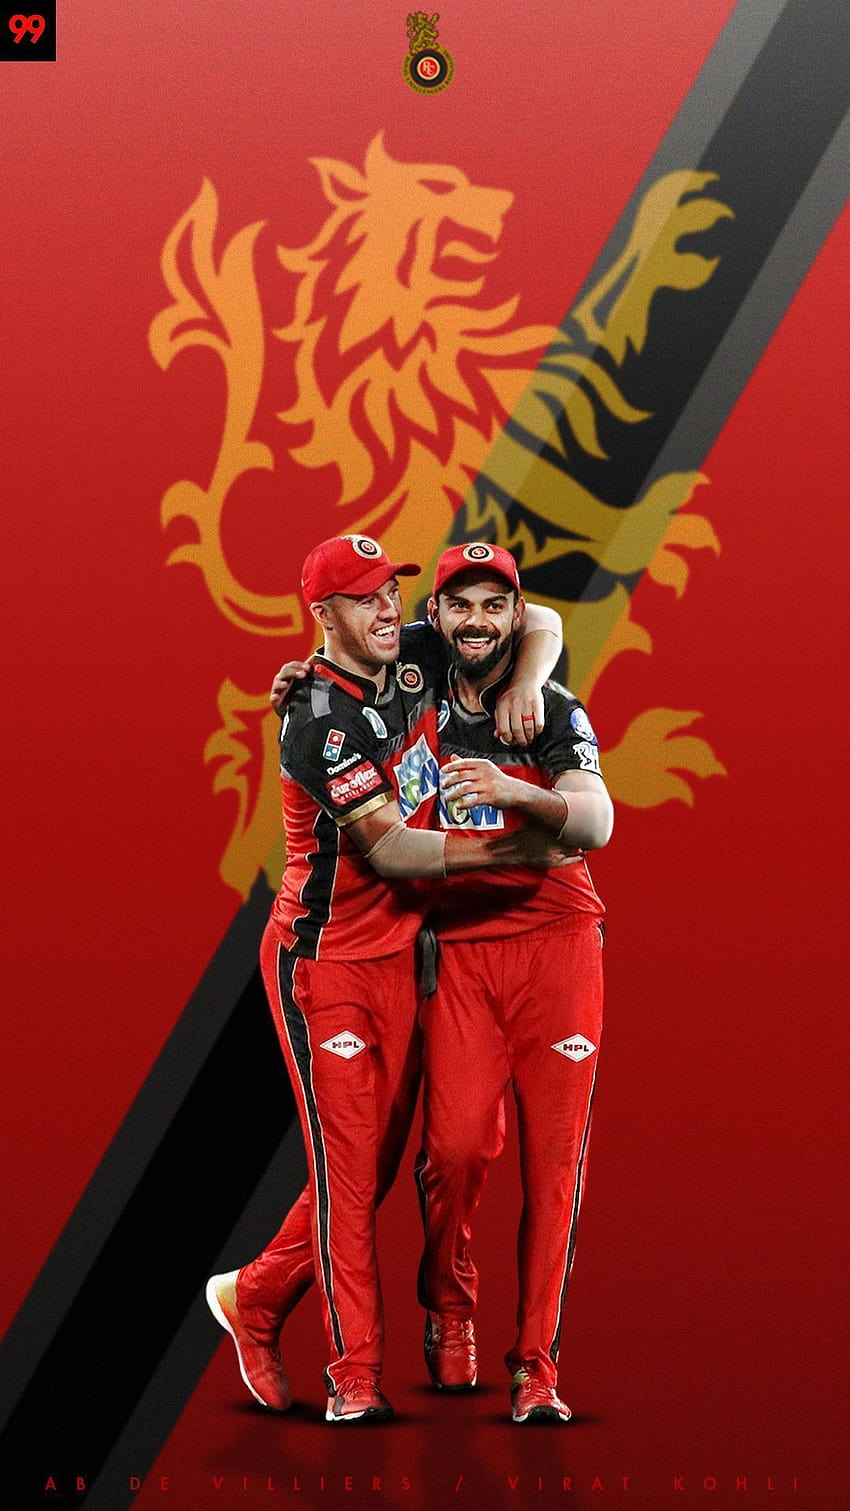 Royal Challengers Bangalore: Squad After IPL Auction 2021. in 2021, グレン・マクスウェル rcb HD電話の壁紙